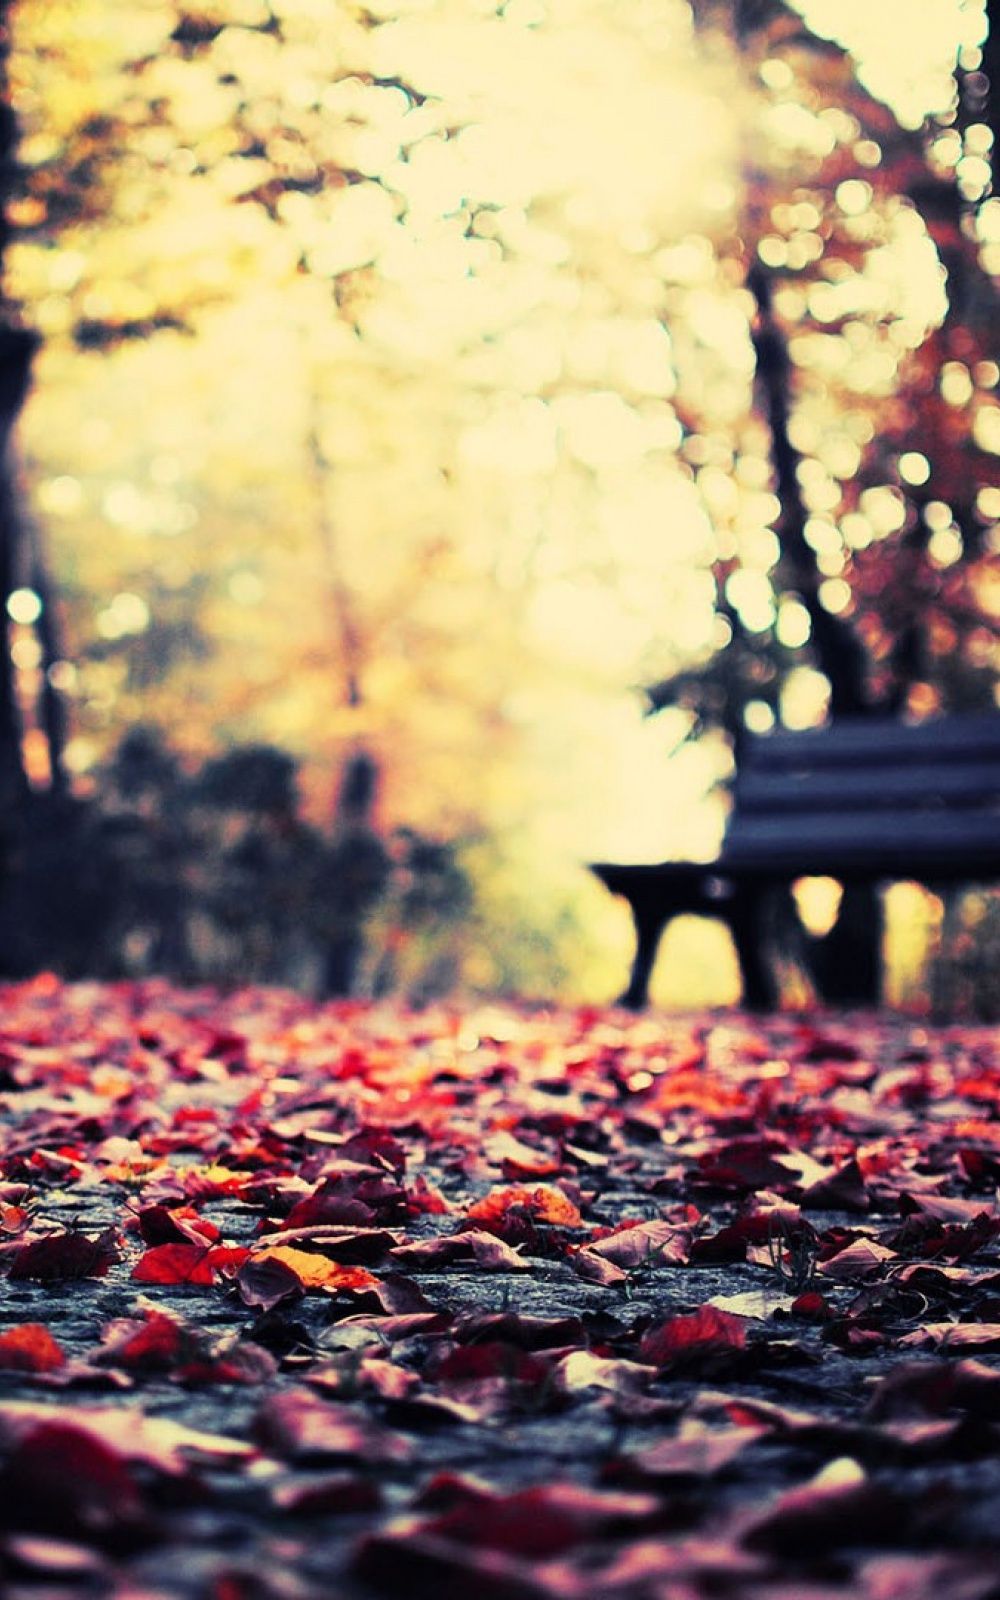 Top 6 Android Autumn Live Wallpapers to Enjoy Falling Leaves